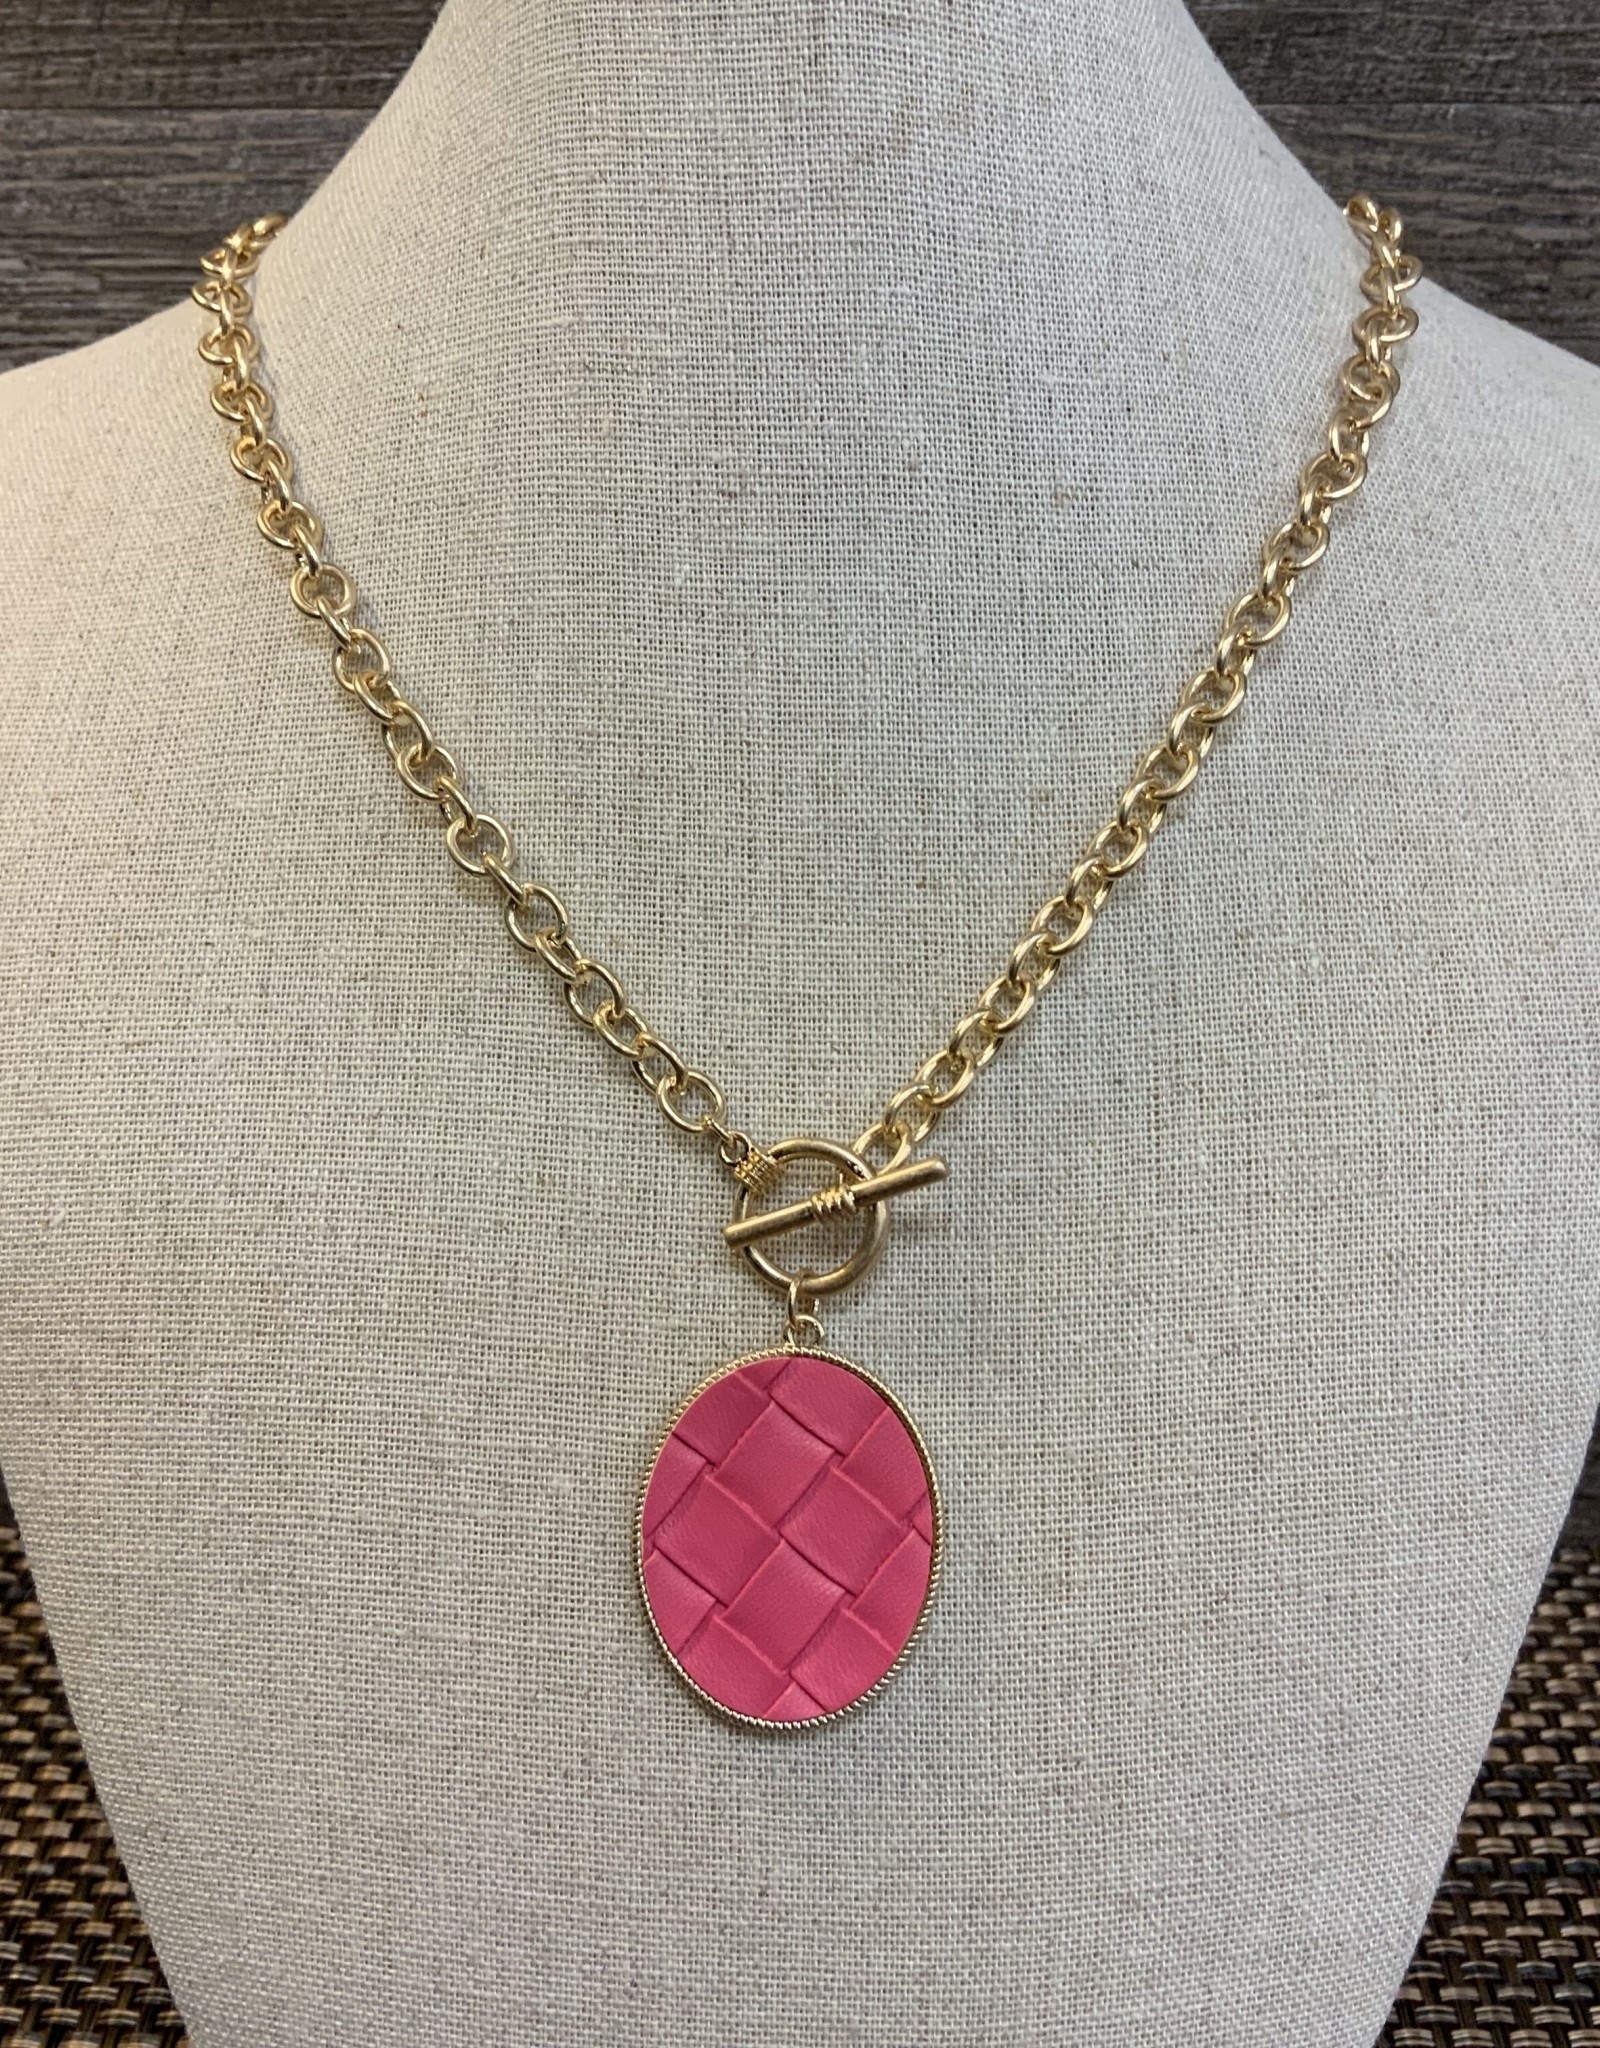 Gold Long Chain w/Magenta Leather Pendant  Necklace